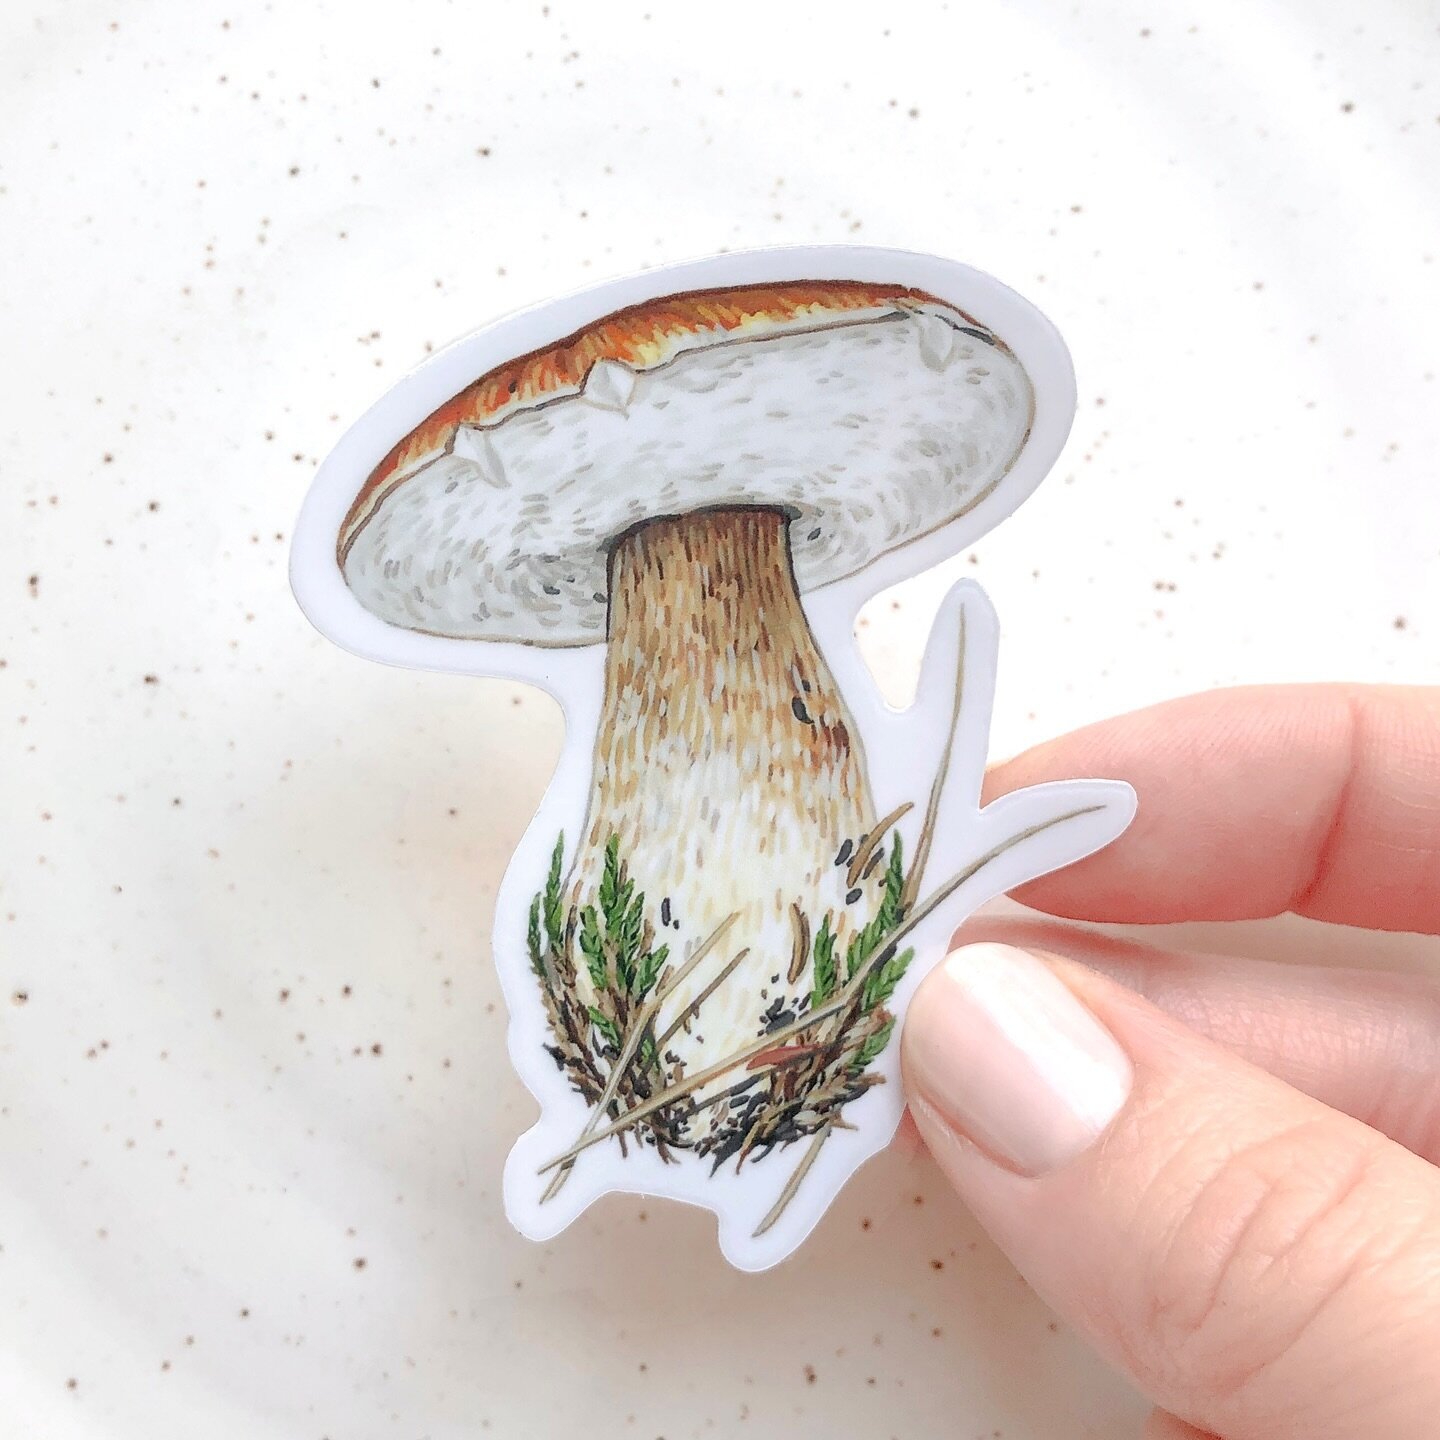 Last market of the year is today! @rusticreel 11-7

Only a handful of these King Bolete stickers left too, come say hello!